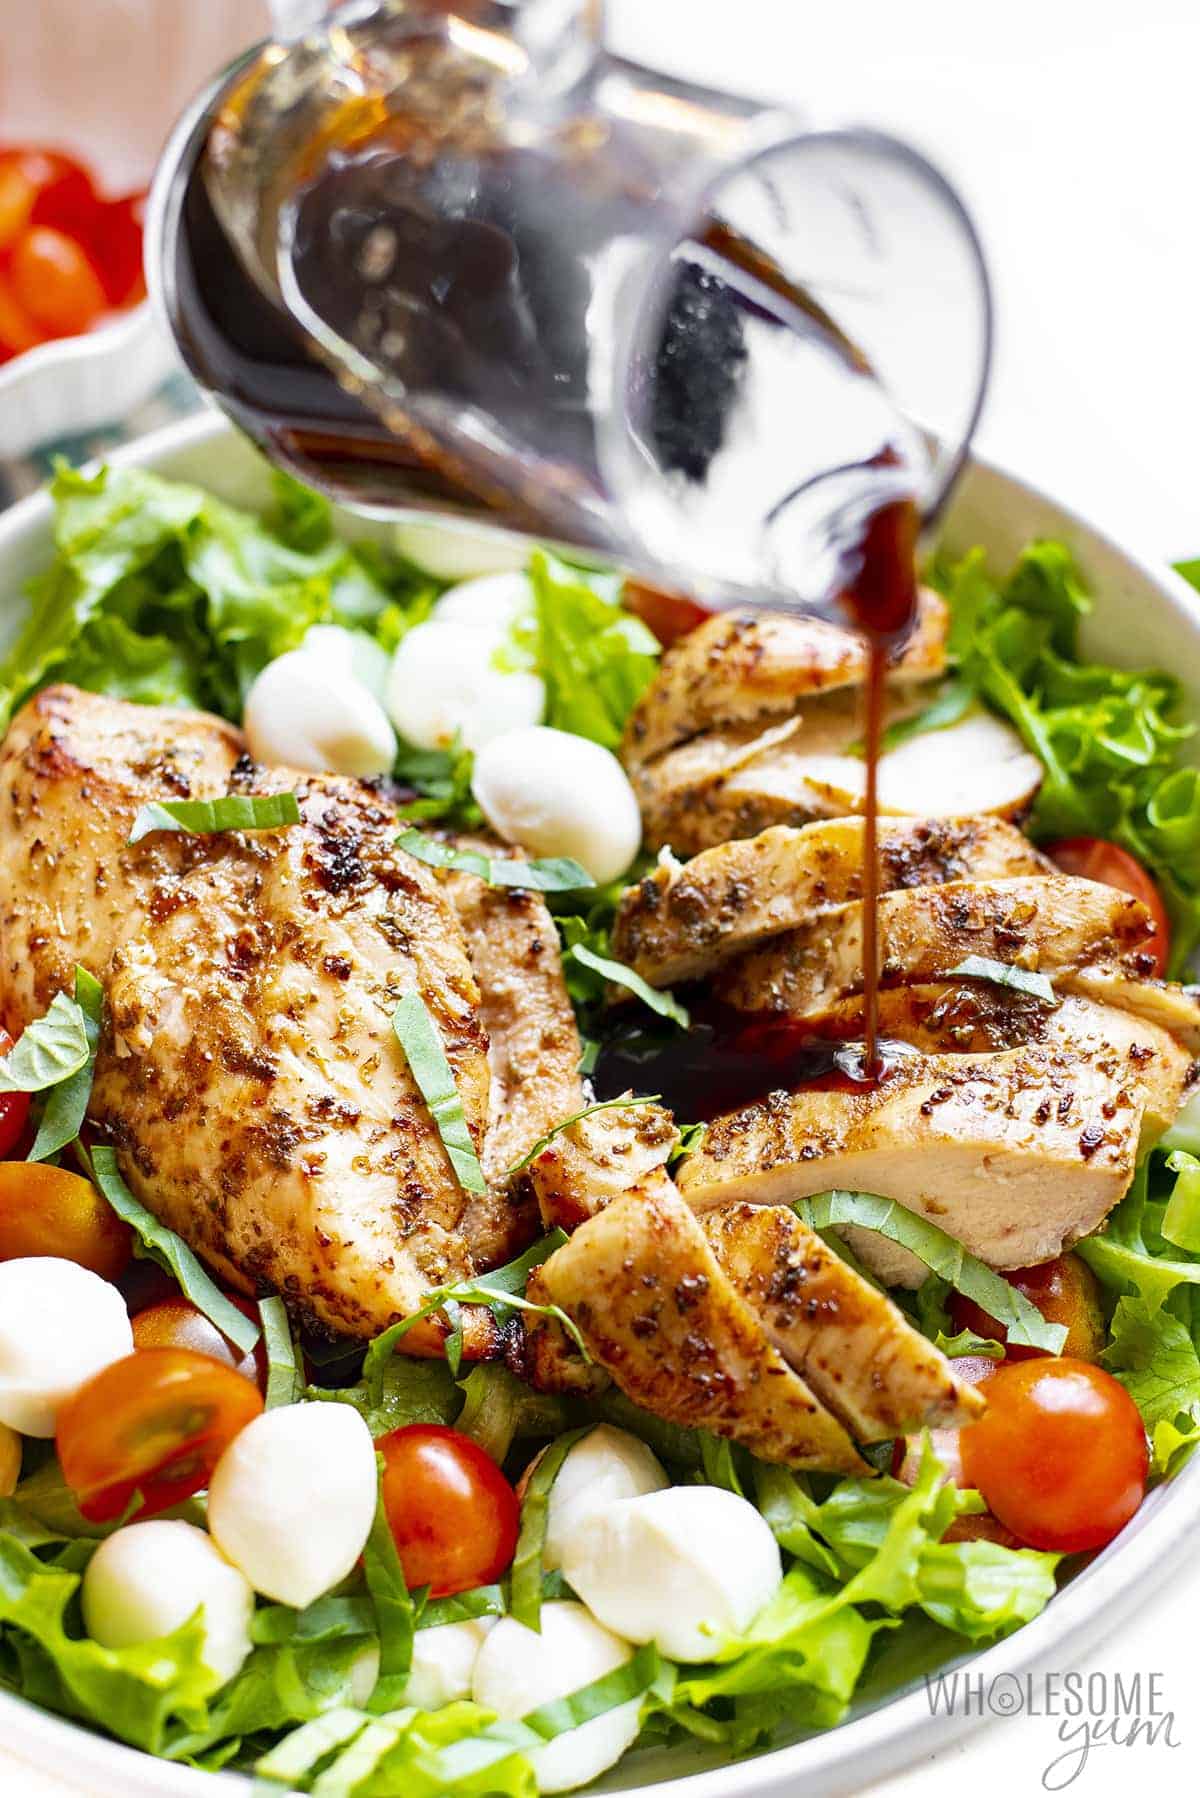 Balsamic glaze pouring over caprese salad with chicken.